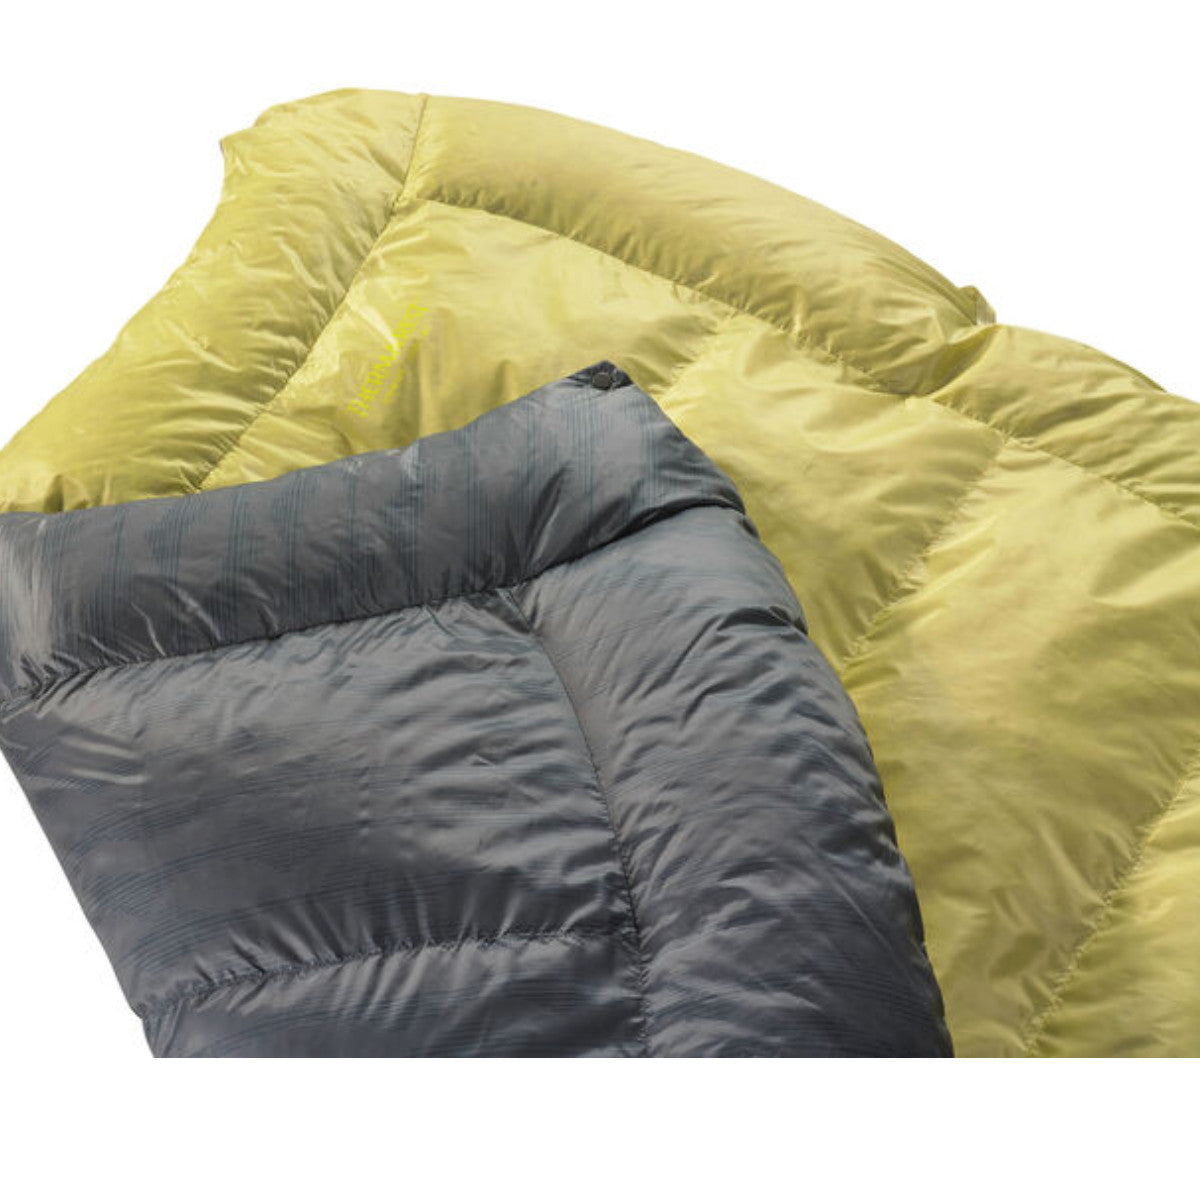 Thermarest Corus 20F/-6C Quilt in golden and grey close up